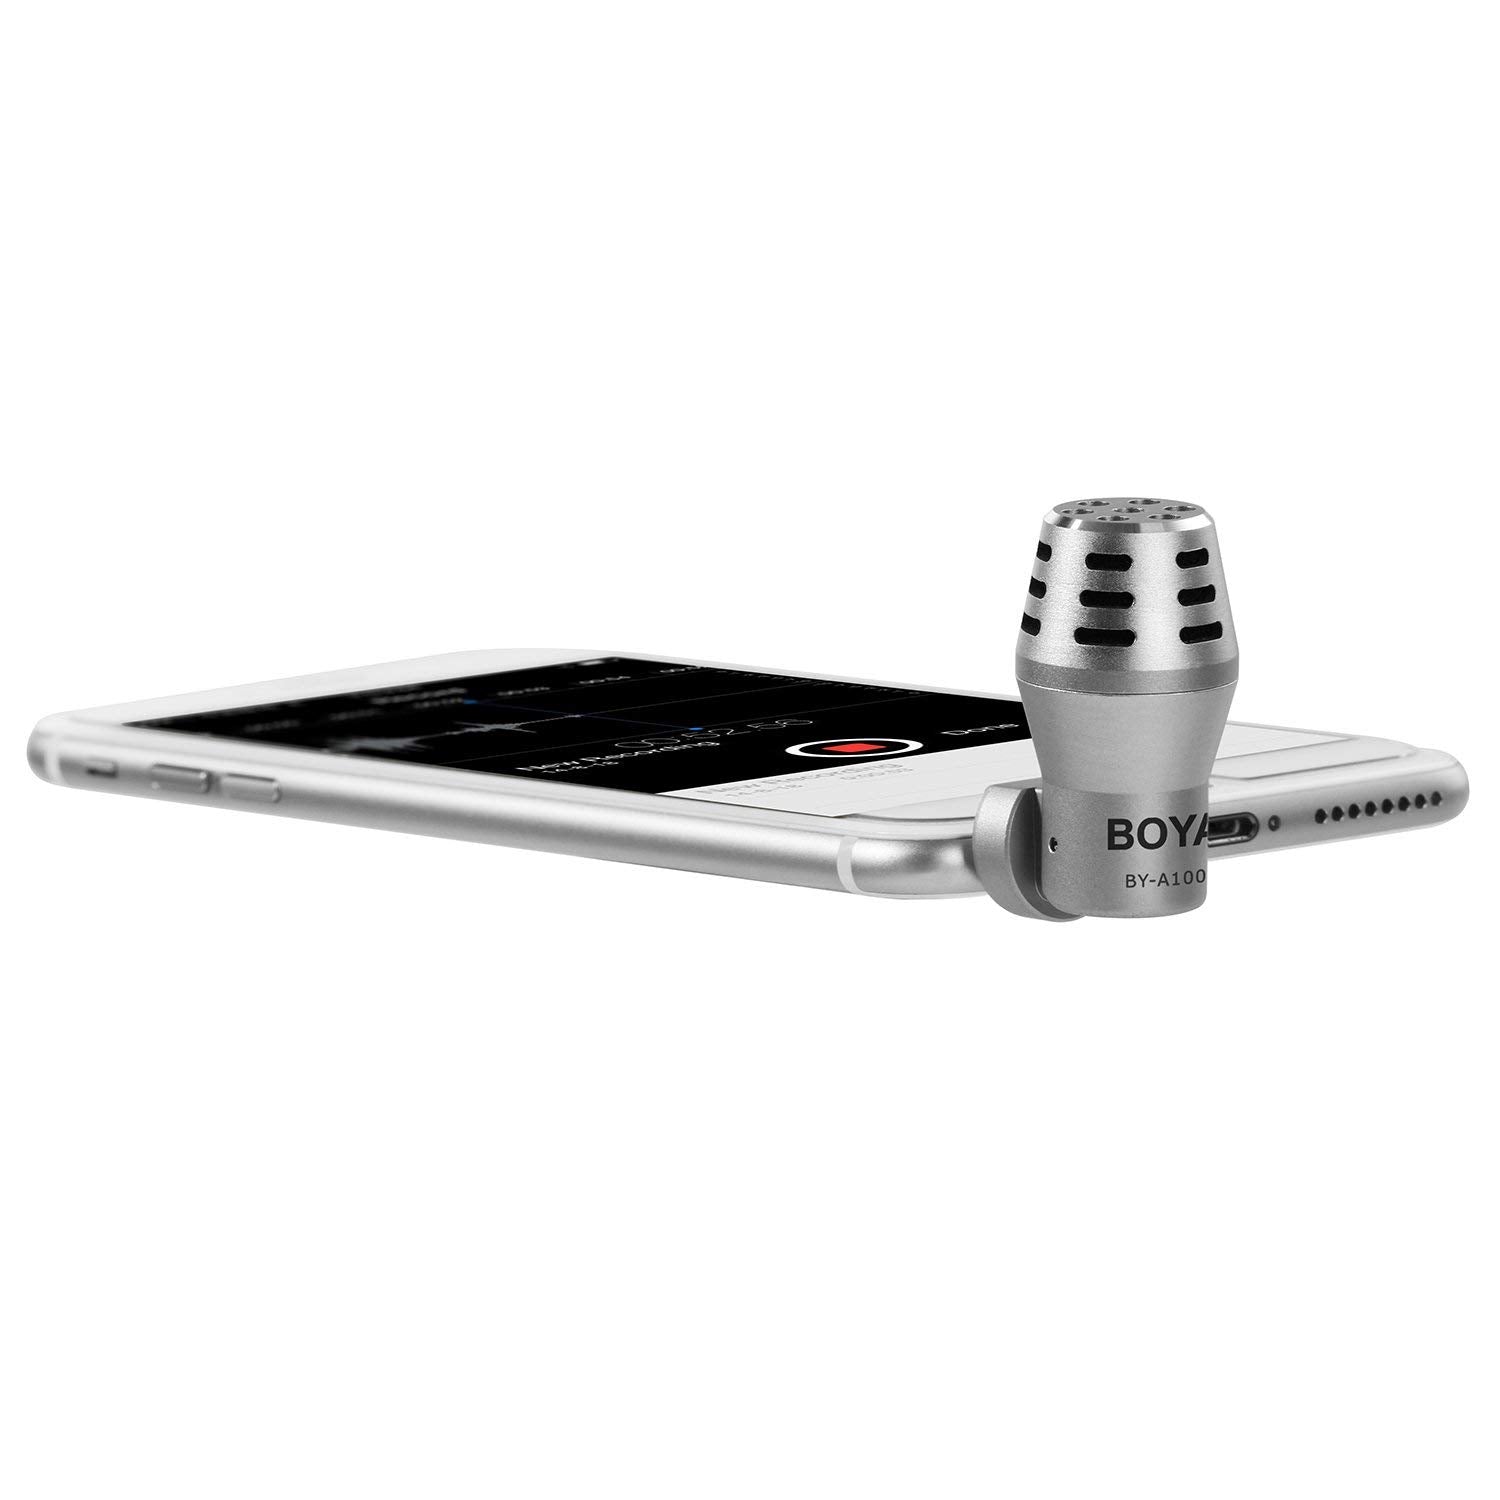 BOYA BY-A100 Omni Directional Condenser Microphone for IOS Android Smartphones ( Silver)